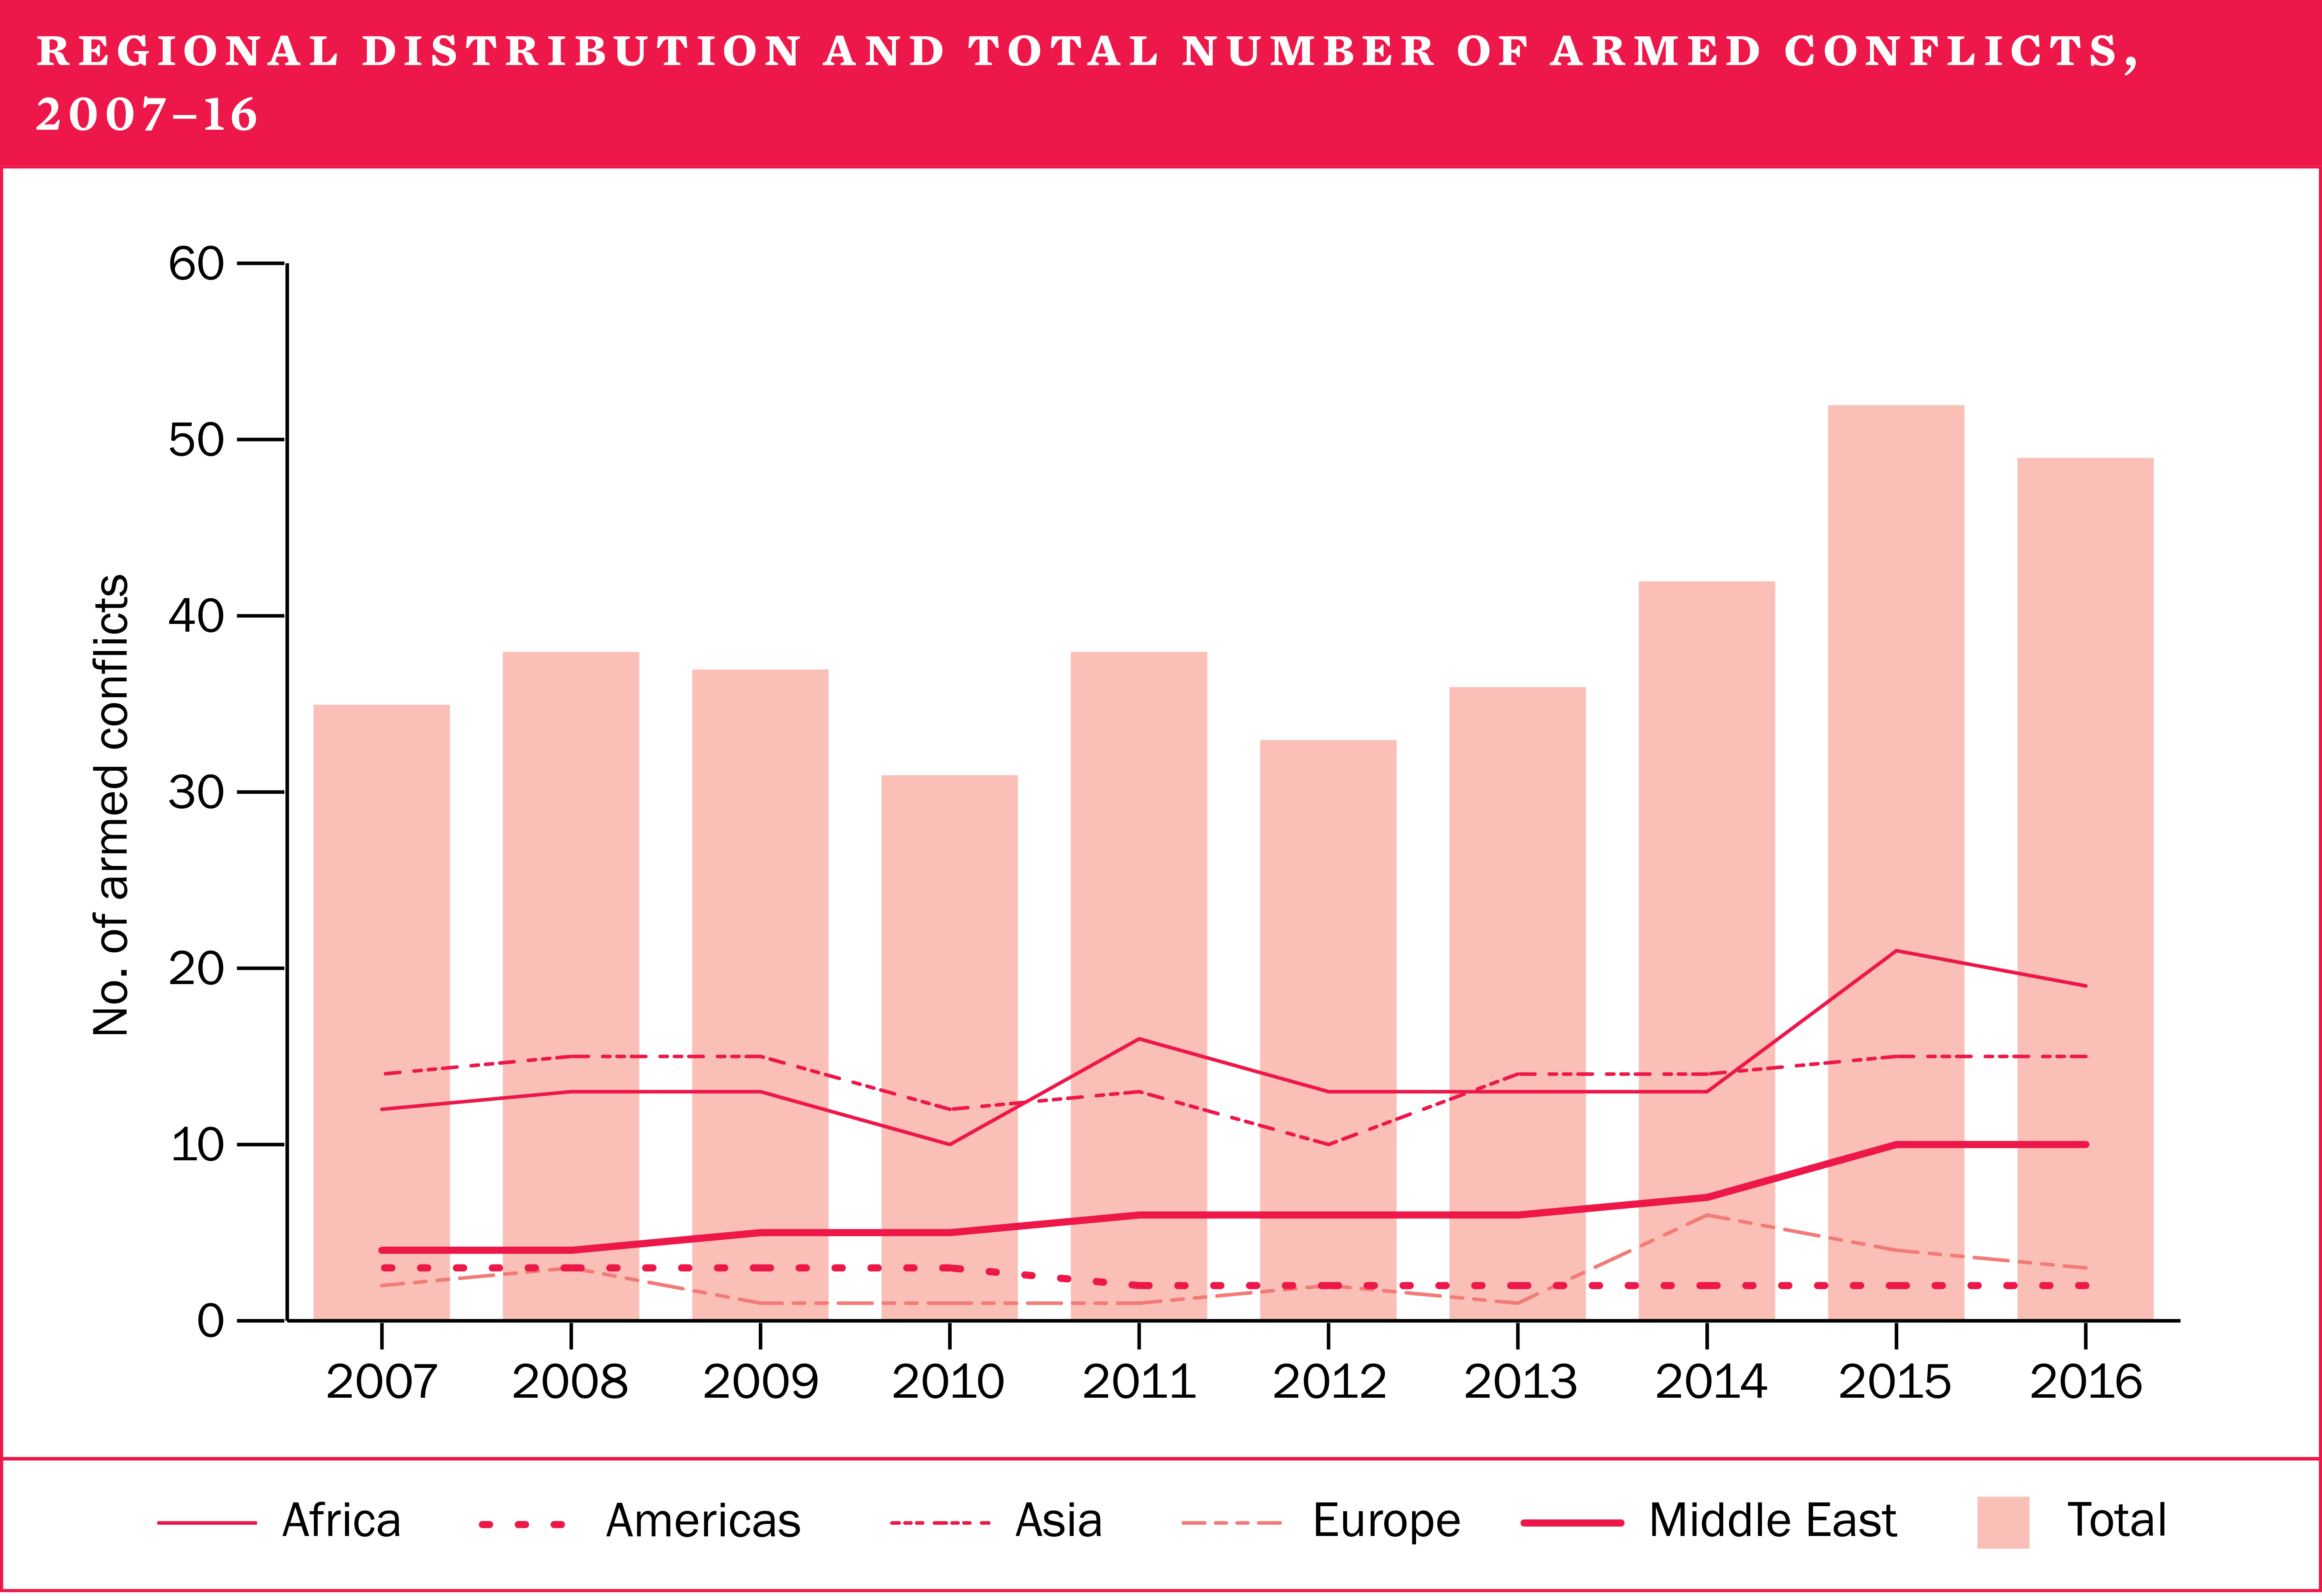 Regional distribution and total number of armed conflicts, 2007-16